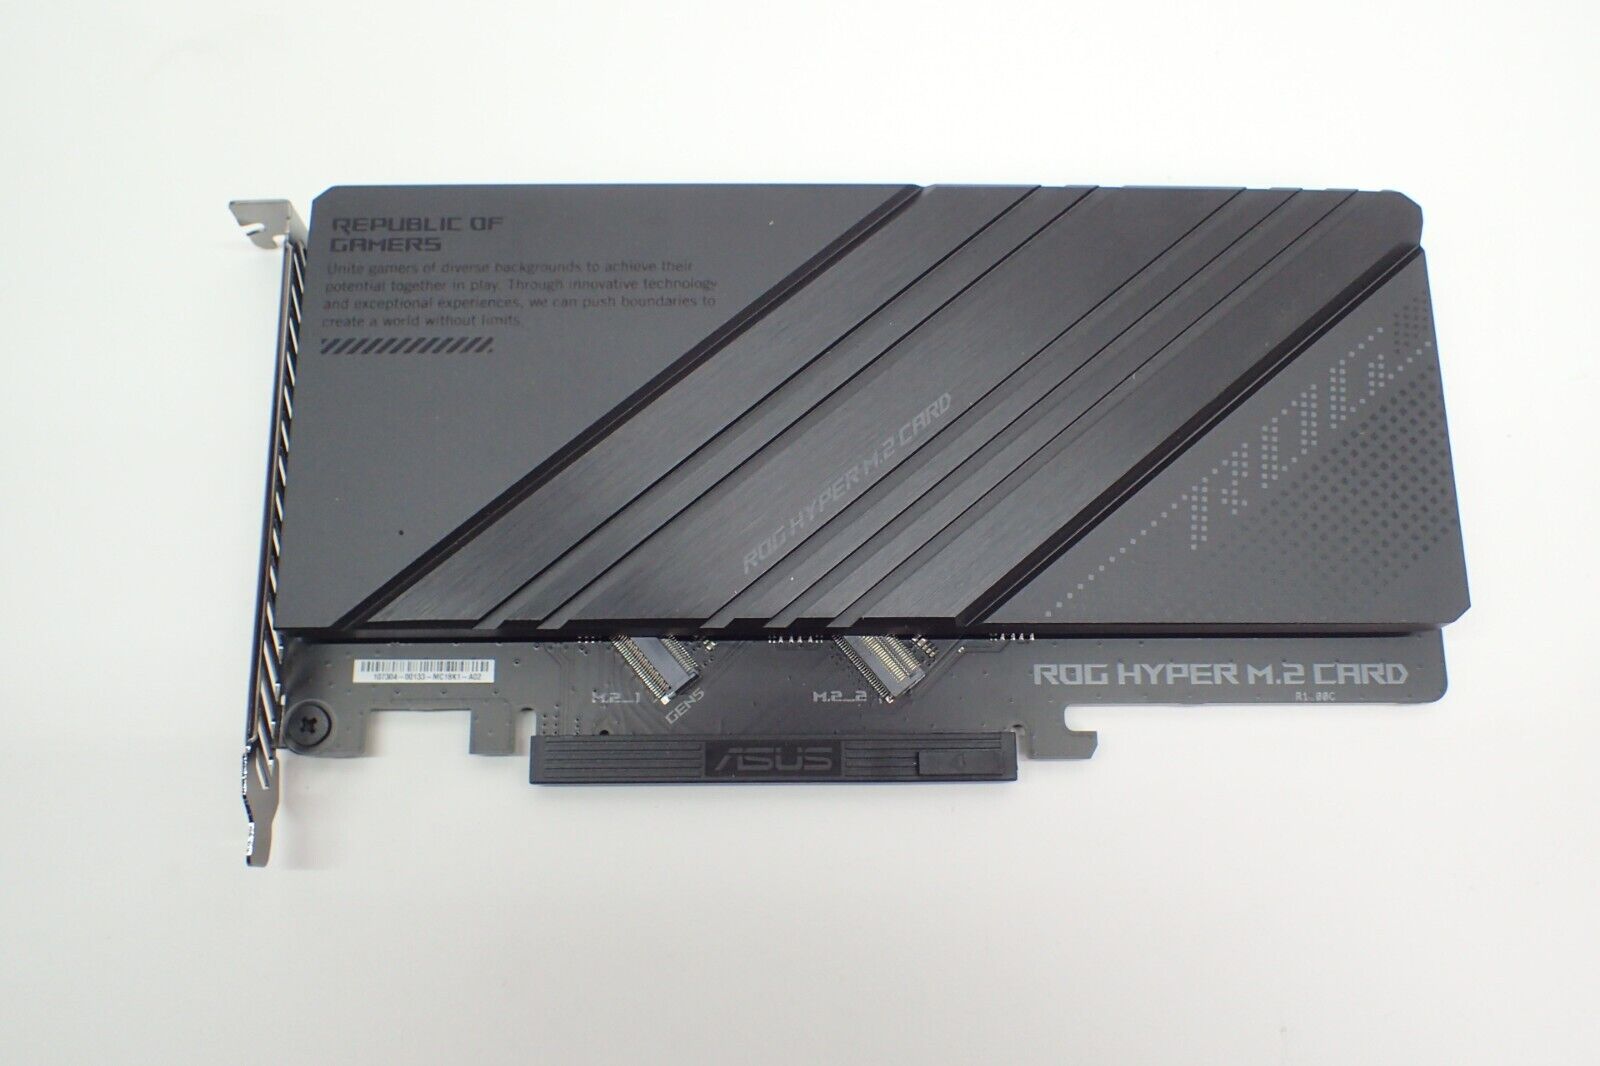 NEW ASUS ROG HYPER M.2 PCIe Card - Gen5 PCIe Ready (2 x M.2 Expansion)